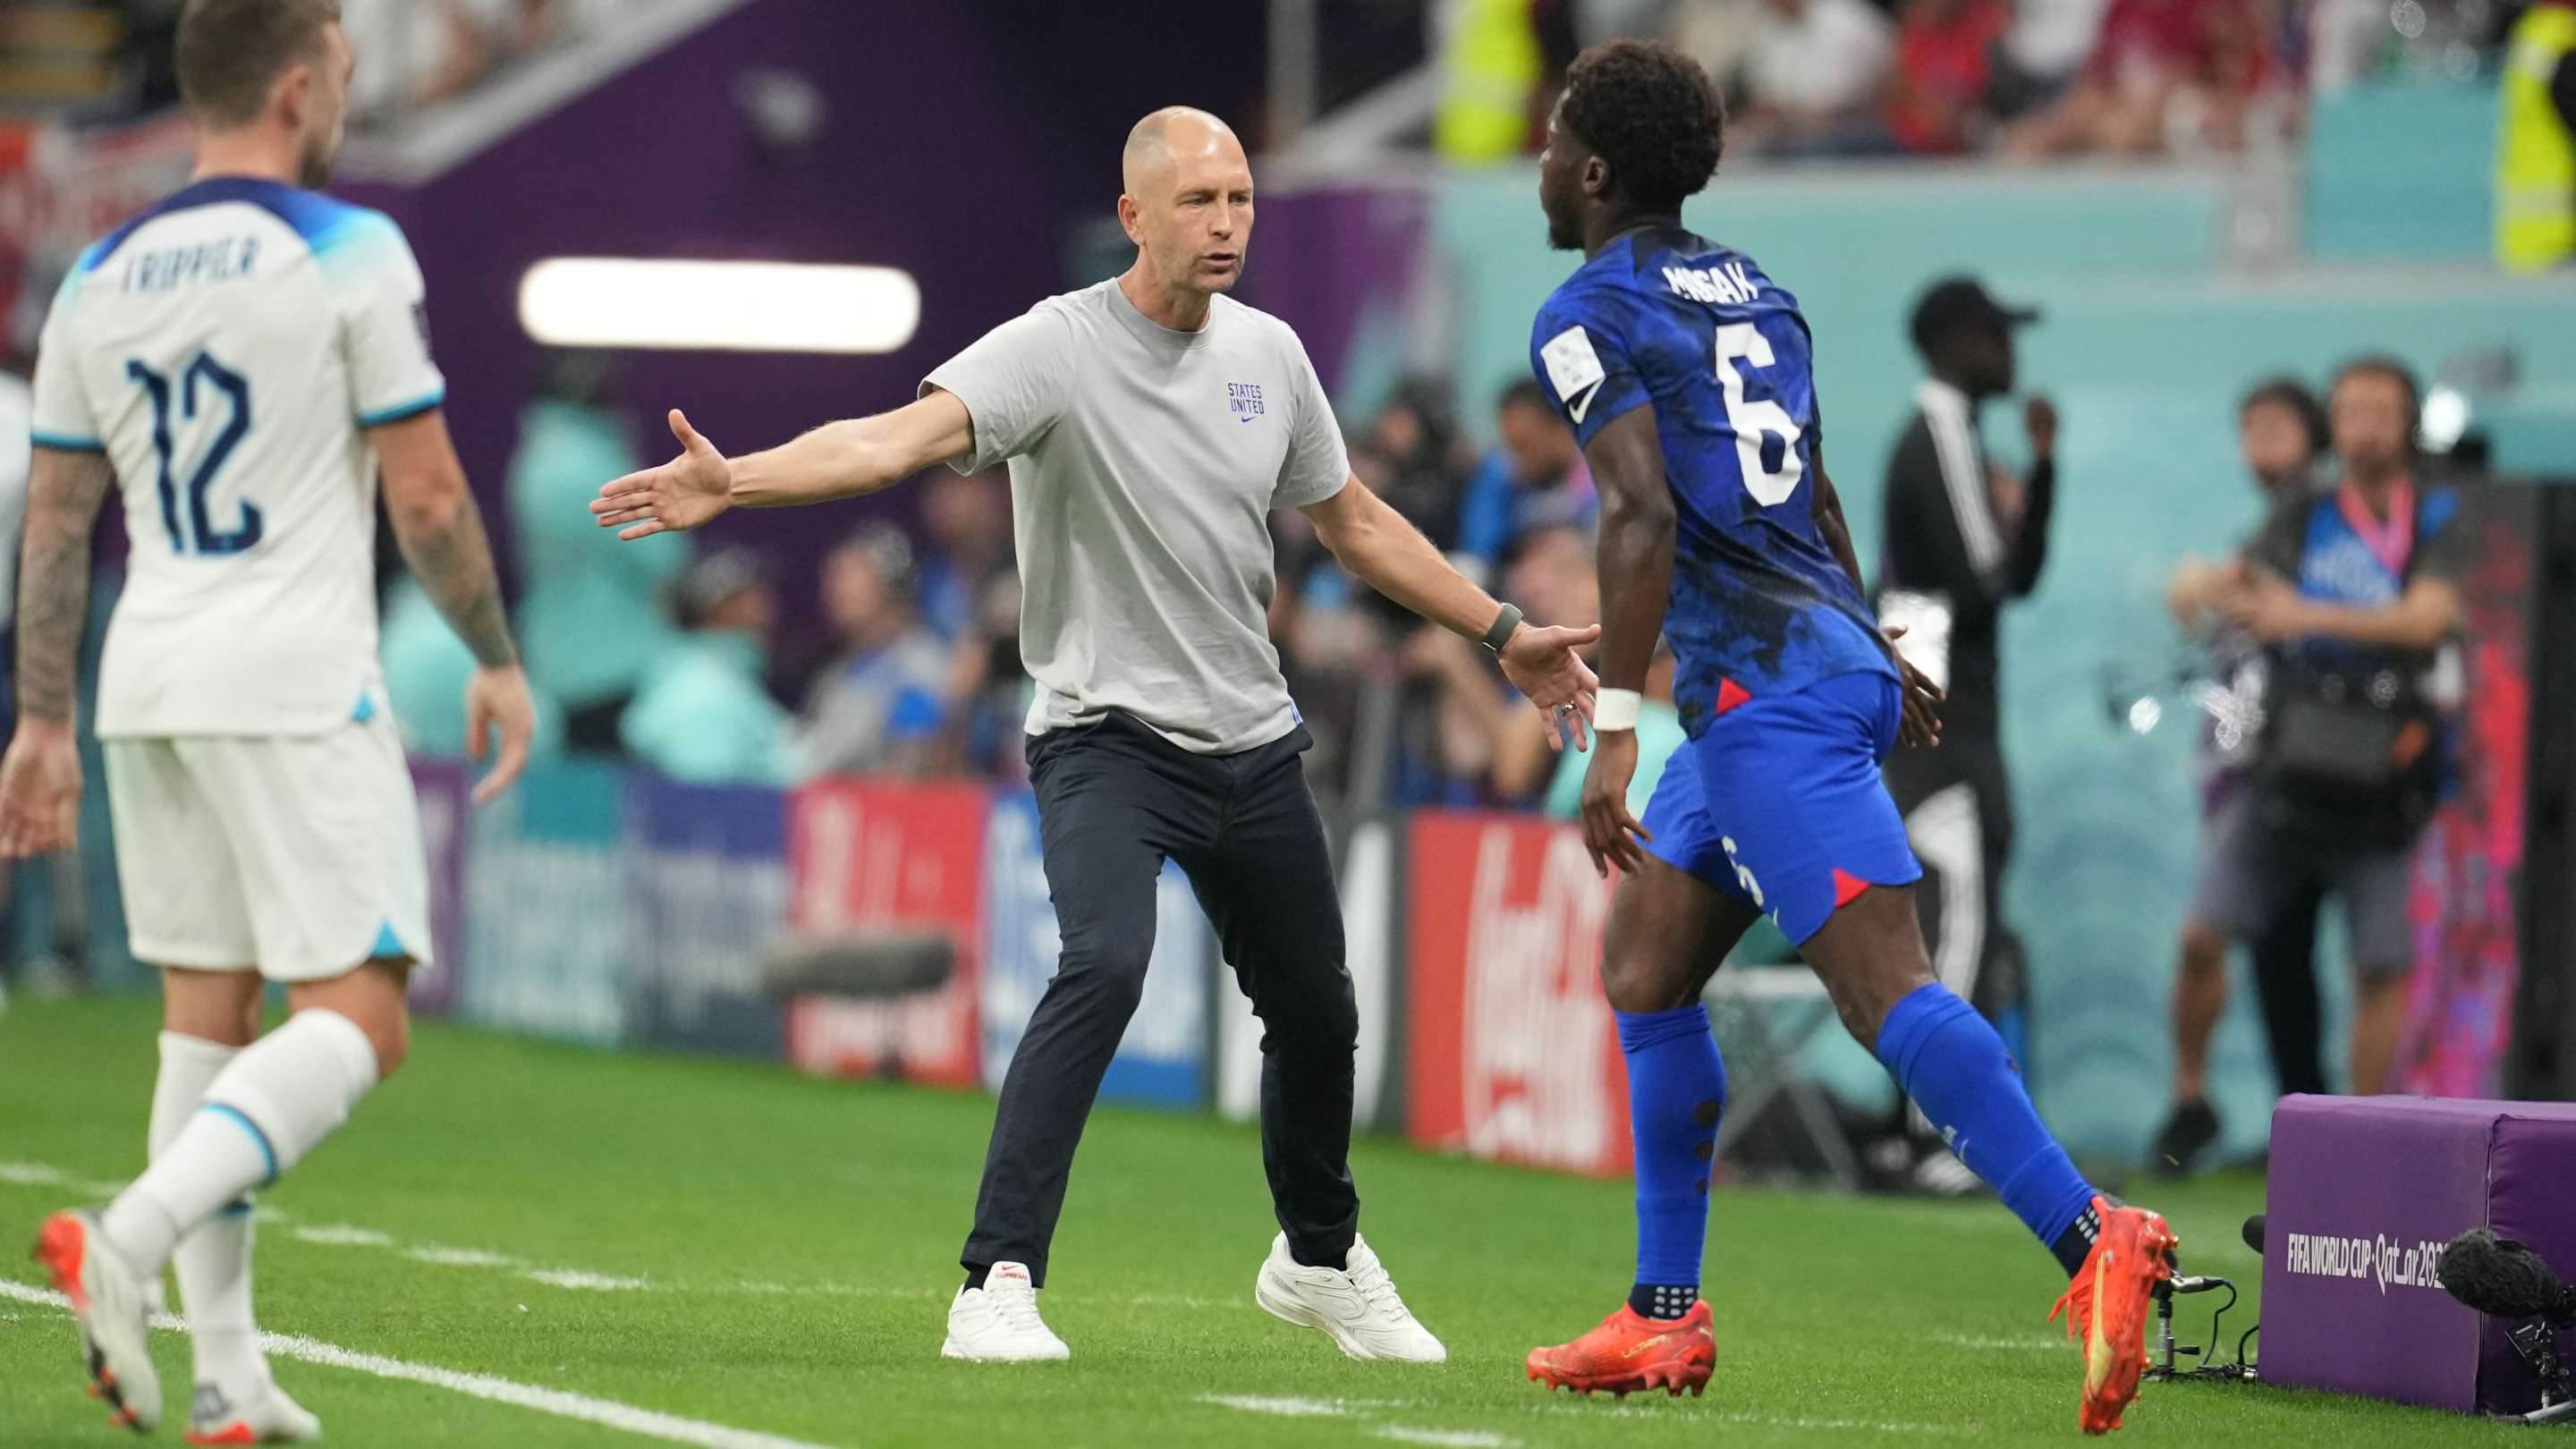 Twitter reacts as USMNT draws 0-0 against England